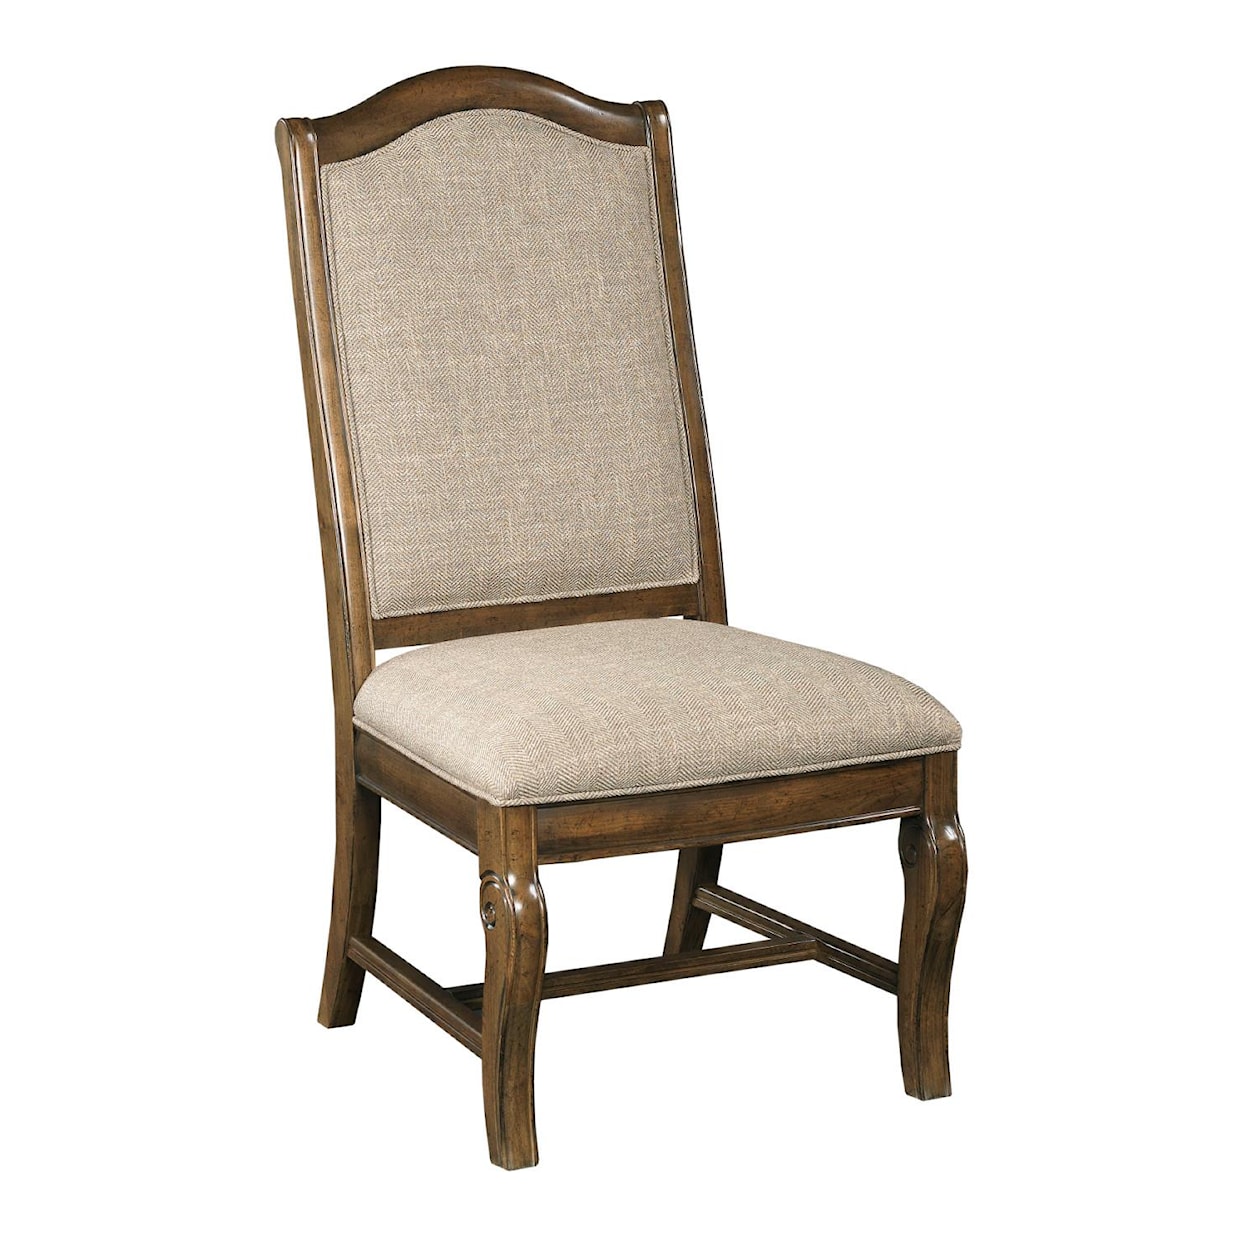 Kincaid Furniture Portolone Upholstered Side Chair